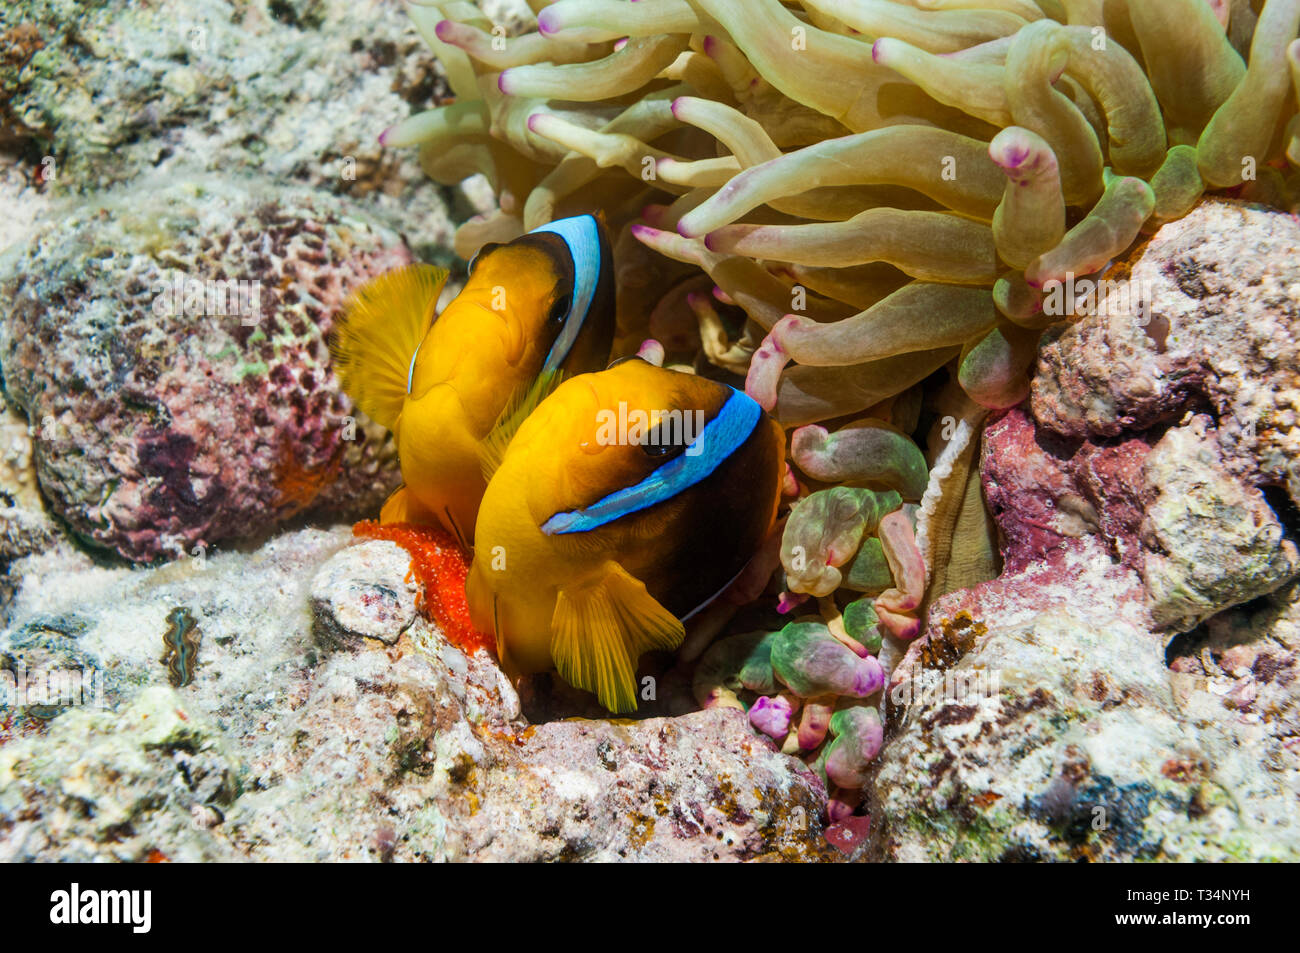 Red Sea anemonefish [Amphiprion bicinctus] female laying eggs with the male close behind to fertilise them,  at base of Magnificent anemone [Heteracti Stock Photo